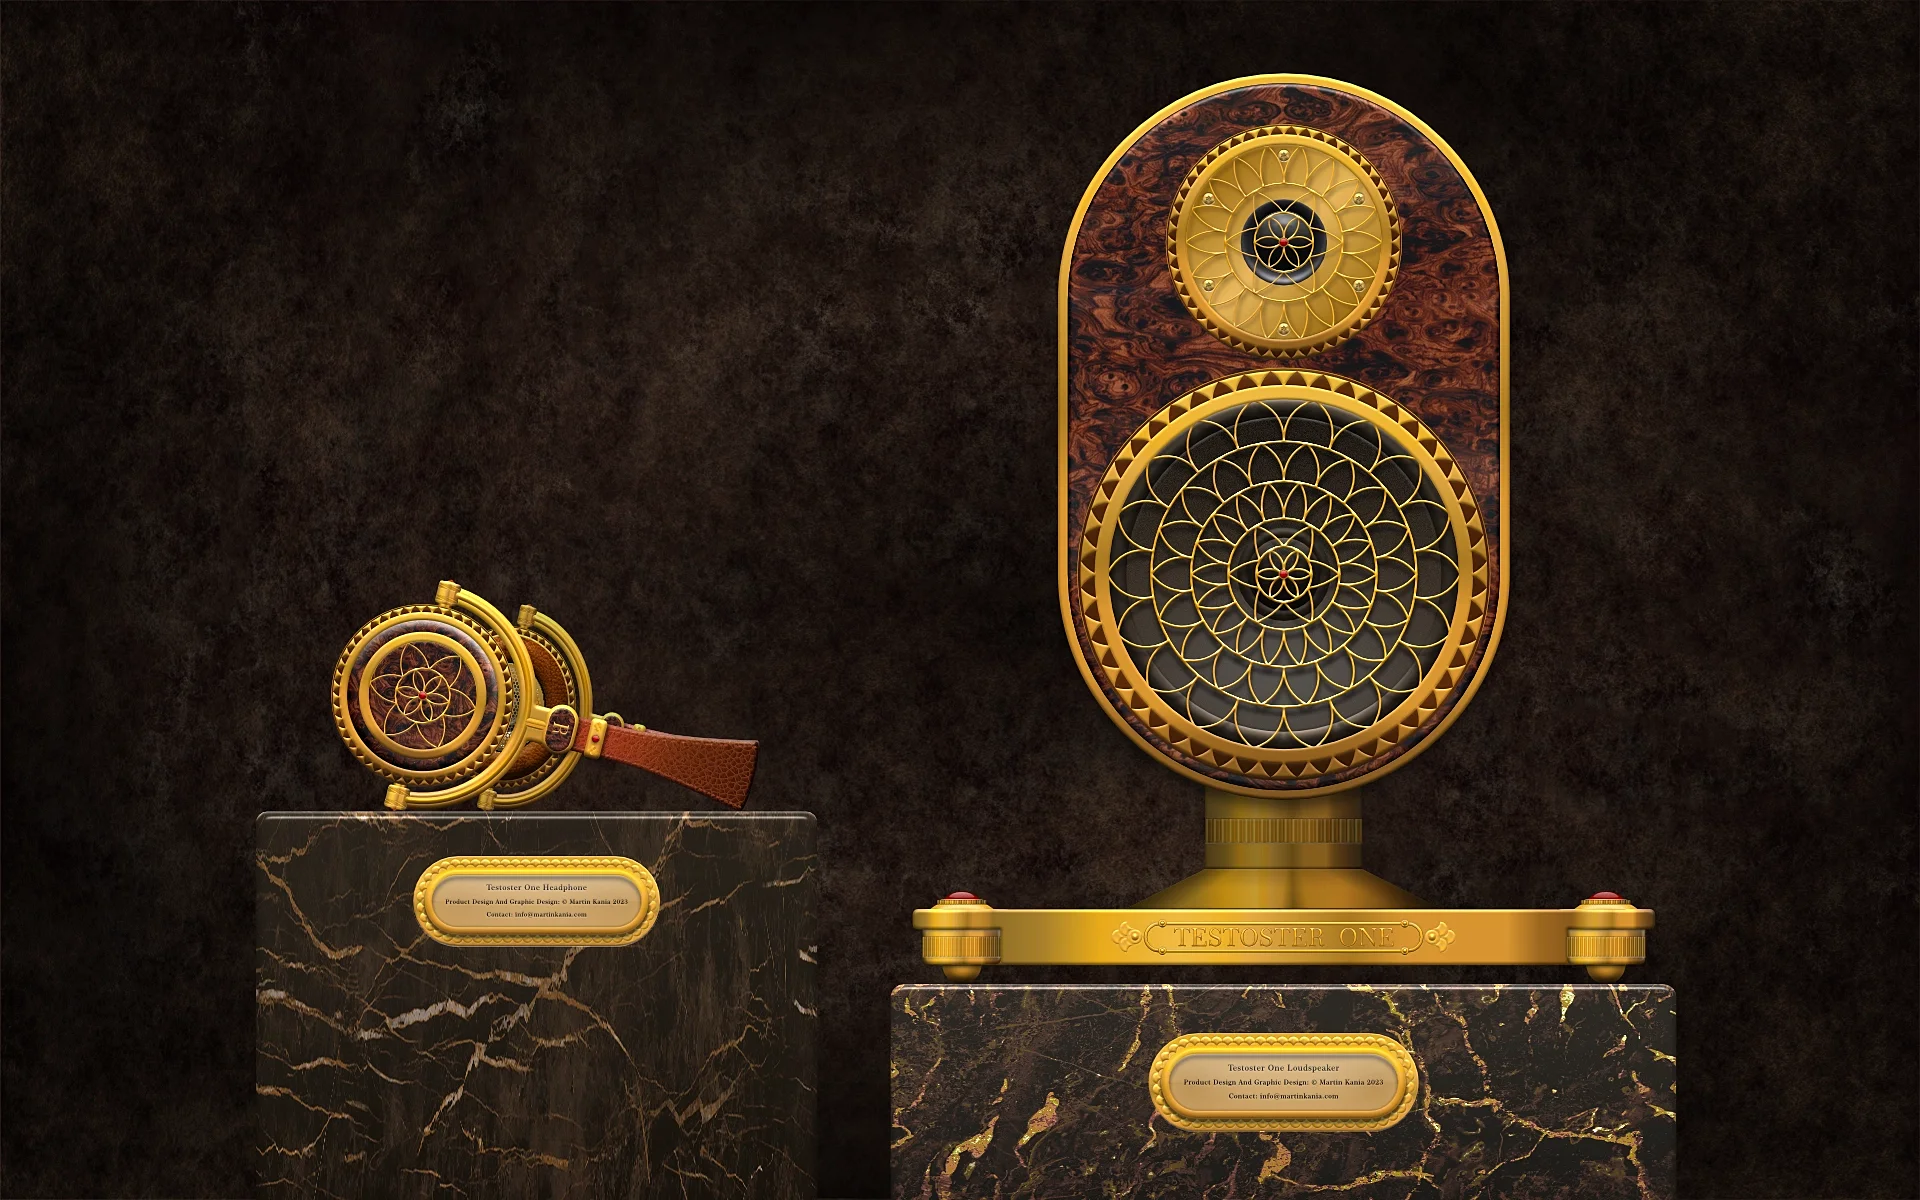 Speaker and headphones with a hint of steampunk - Martin Kania Design